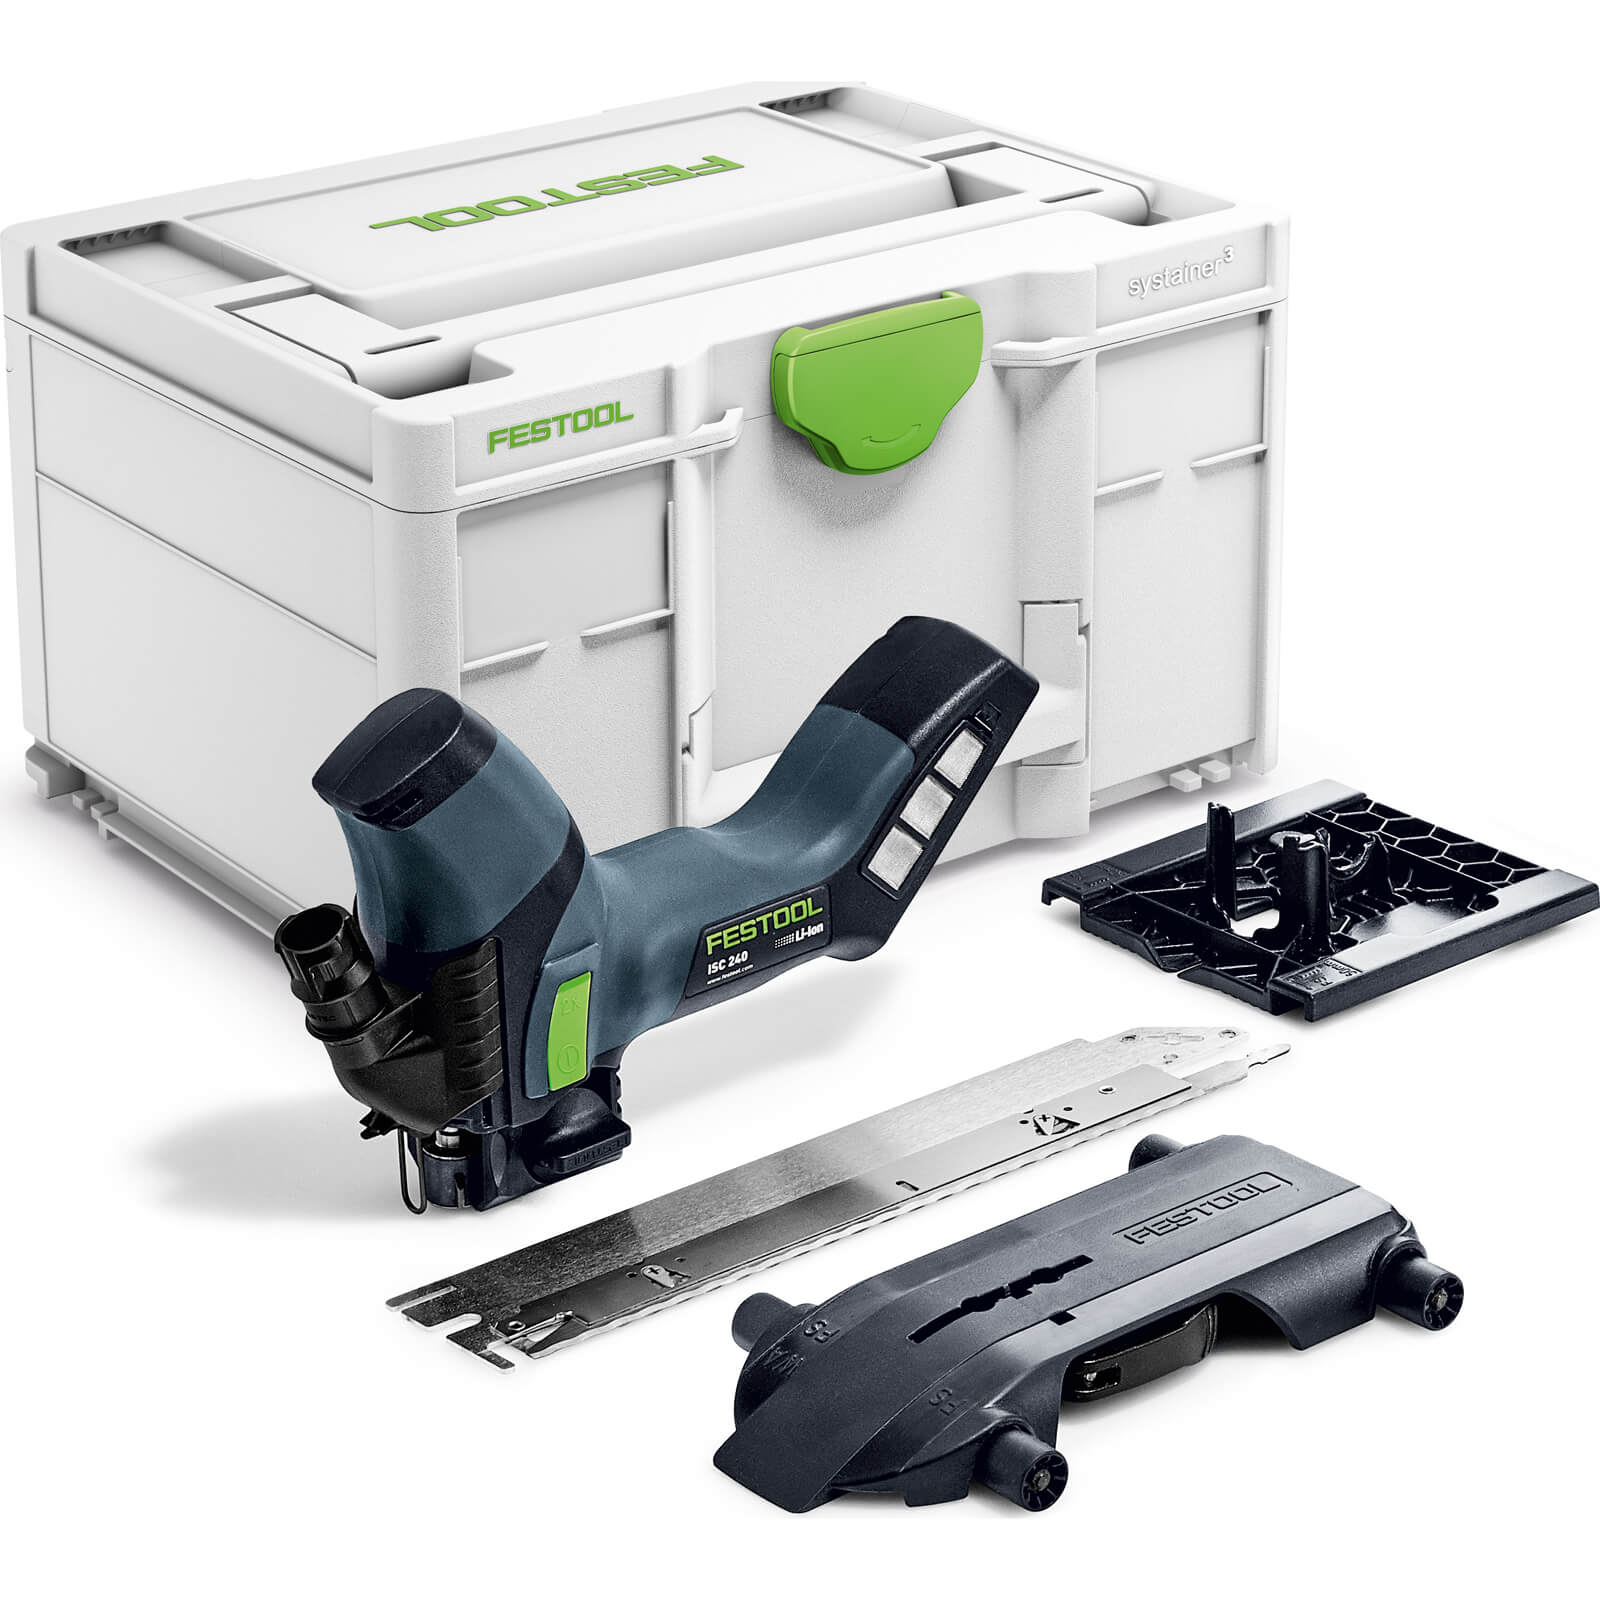 Festool ISC 240 18v Cordless Brushless Insulation Saw No Batteries No Charger Case